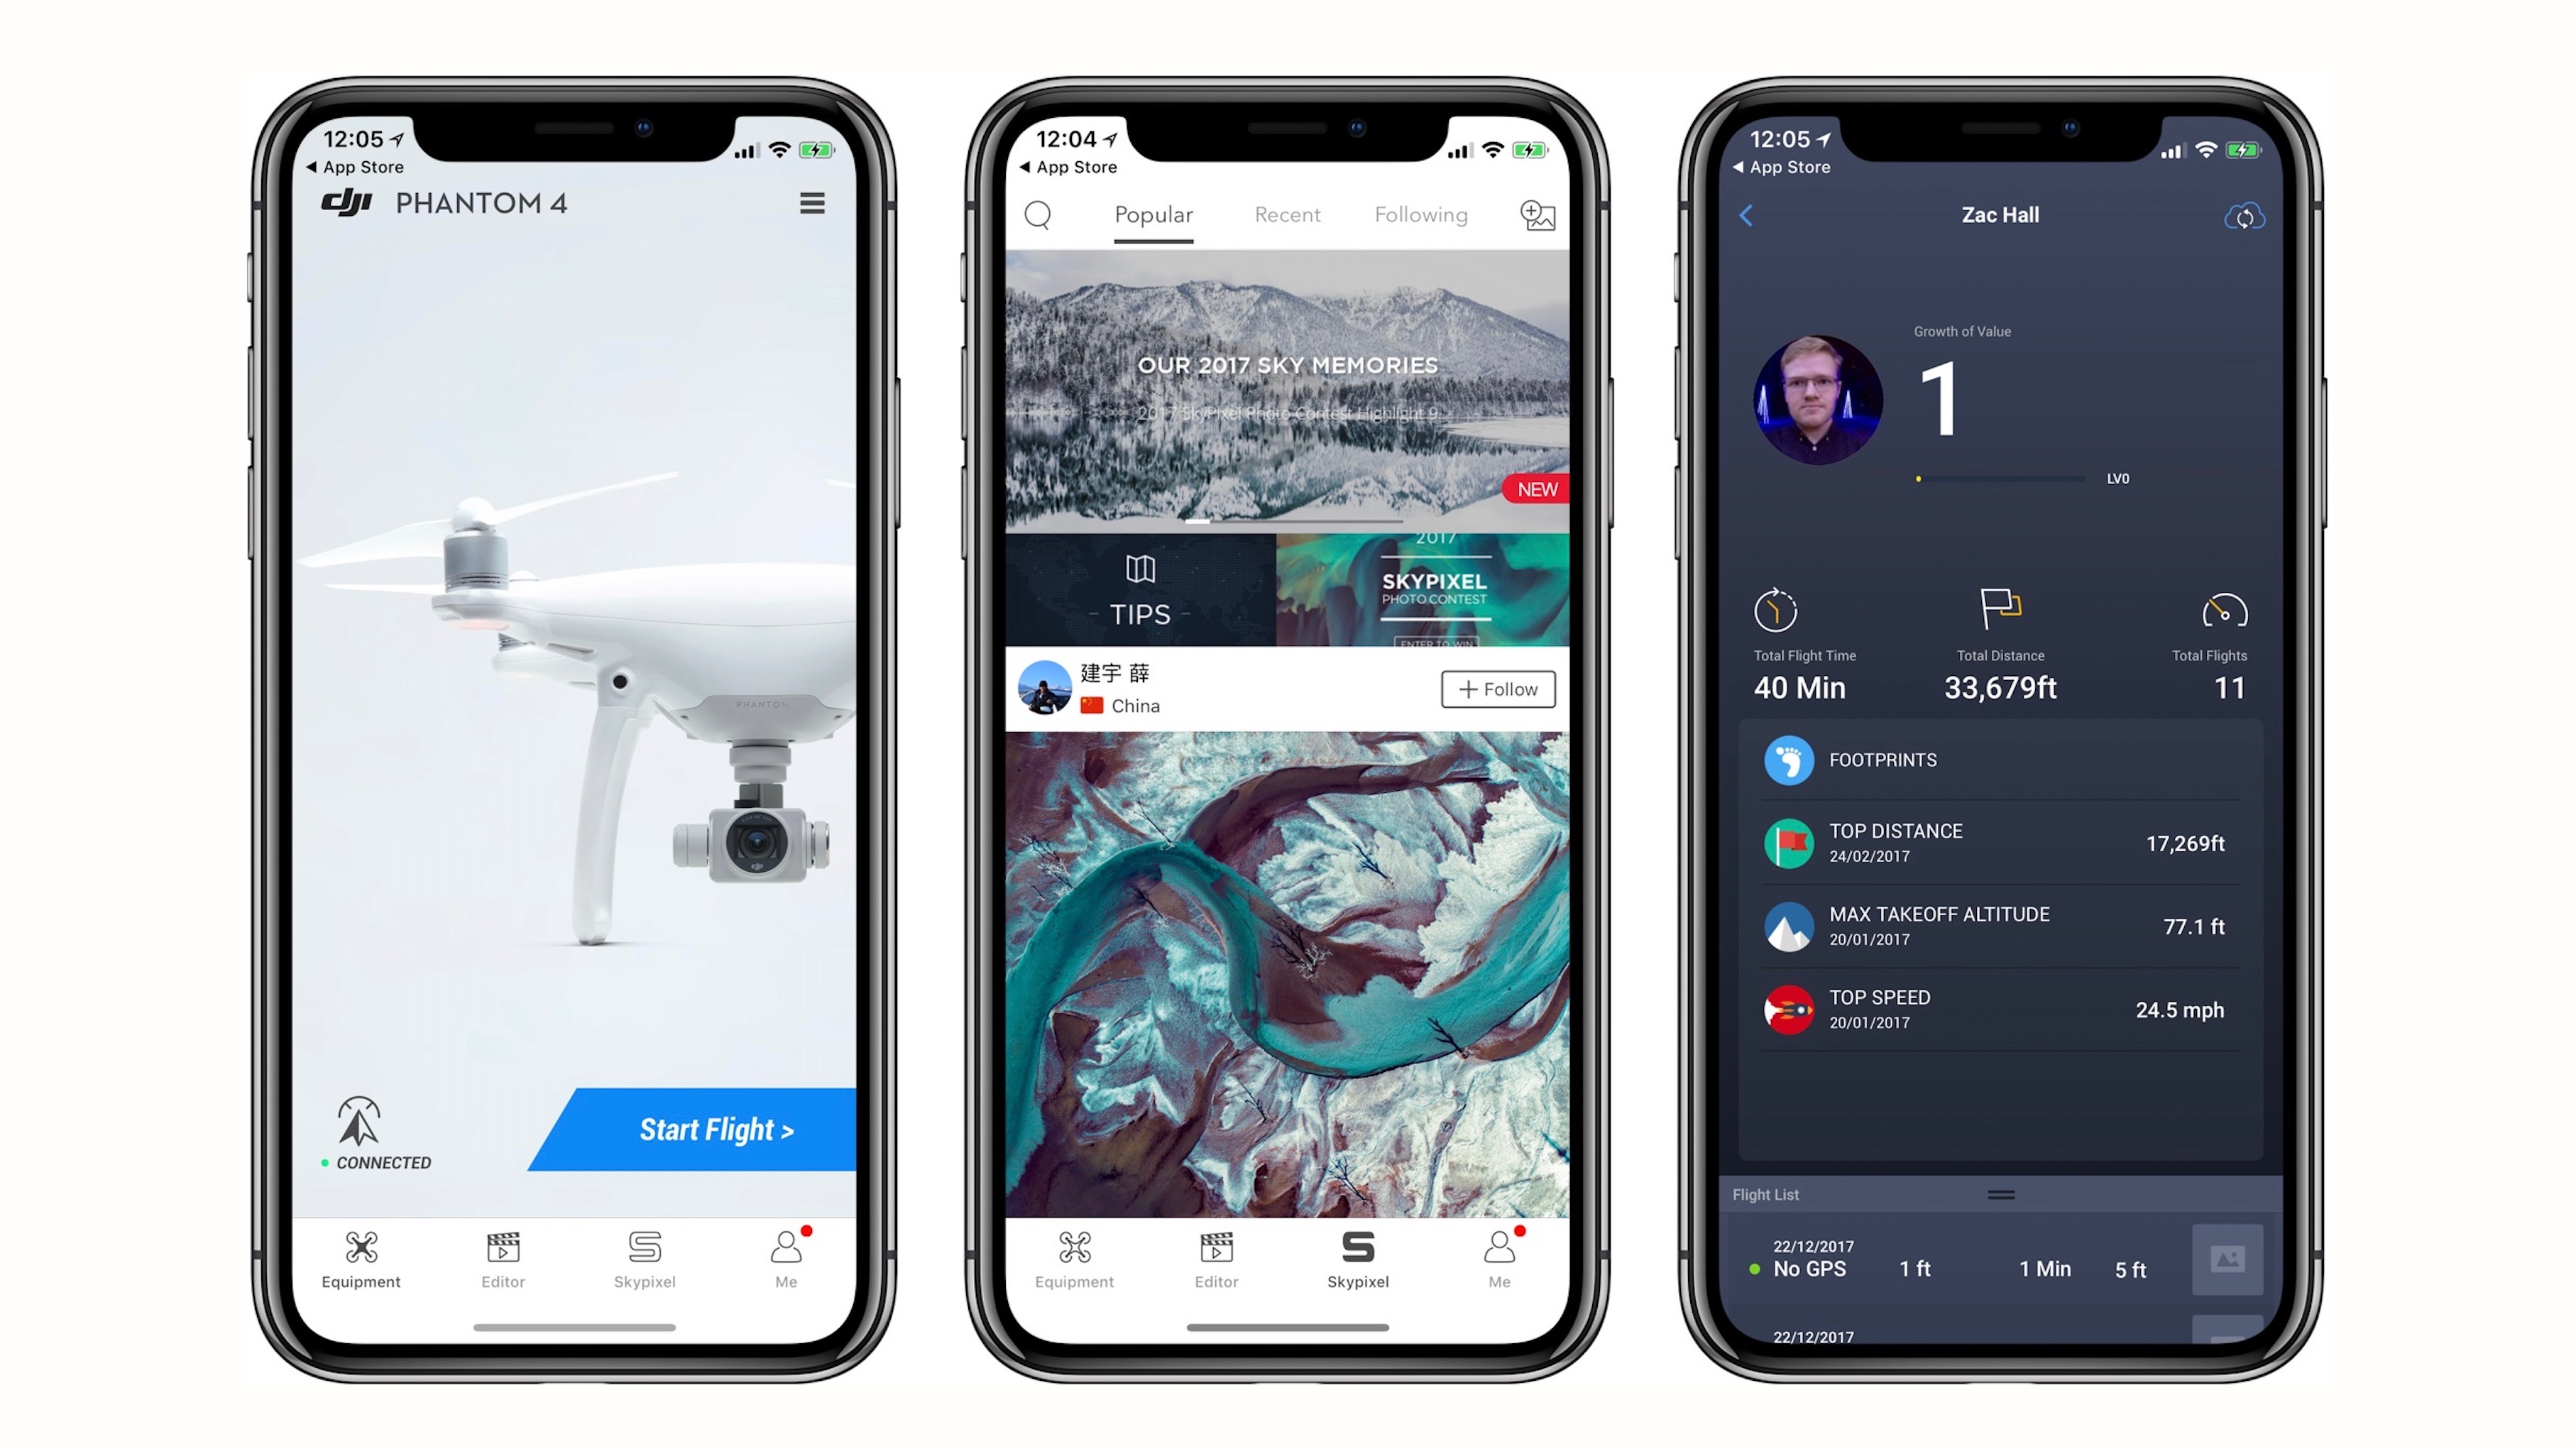 DJI for iOS now goes full screen on iPhone new Spark and Phantom 4 Pro drone updates -